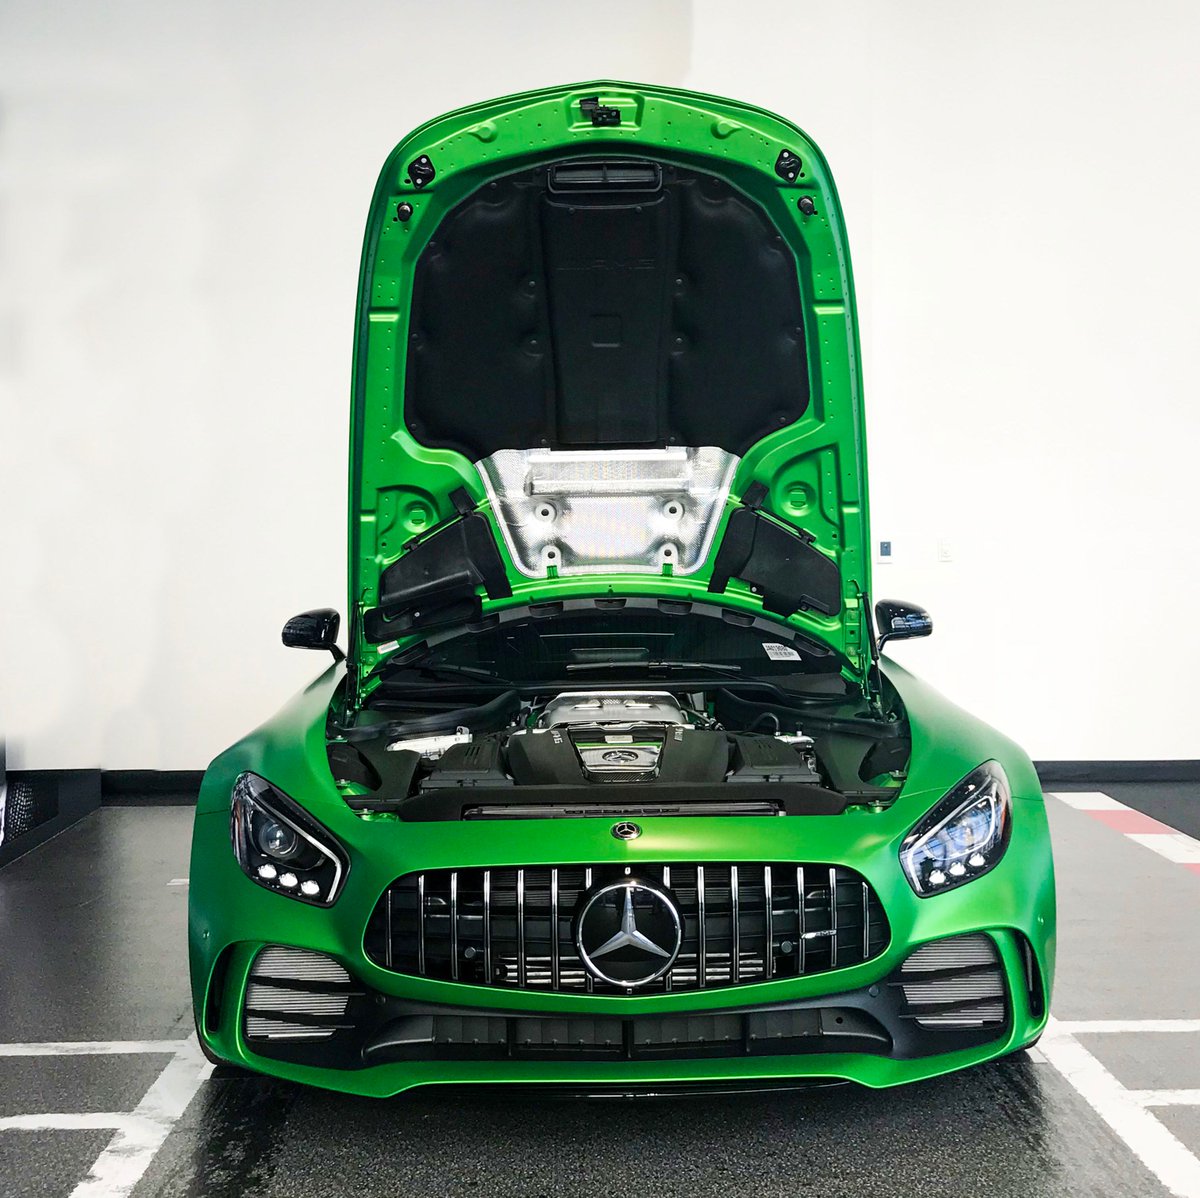 Mercedes Benz Of Walnut Creek On Twitter For The Lucky Few This Amg In Green Hell Magno Is Better Than A Pot Of Gold Happy St Patrick S Day From Mercedes Benz Of Walnut Creek